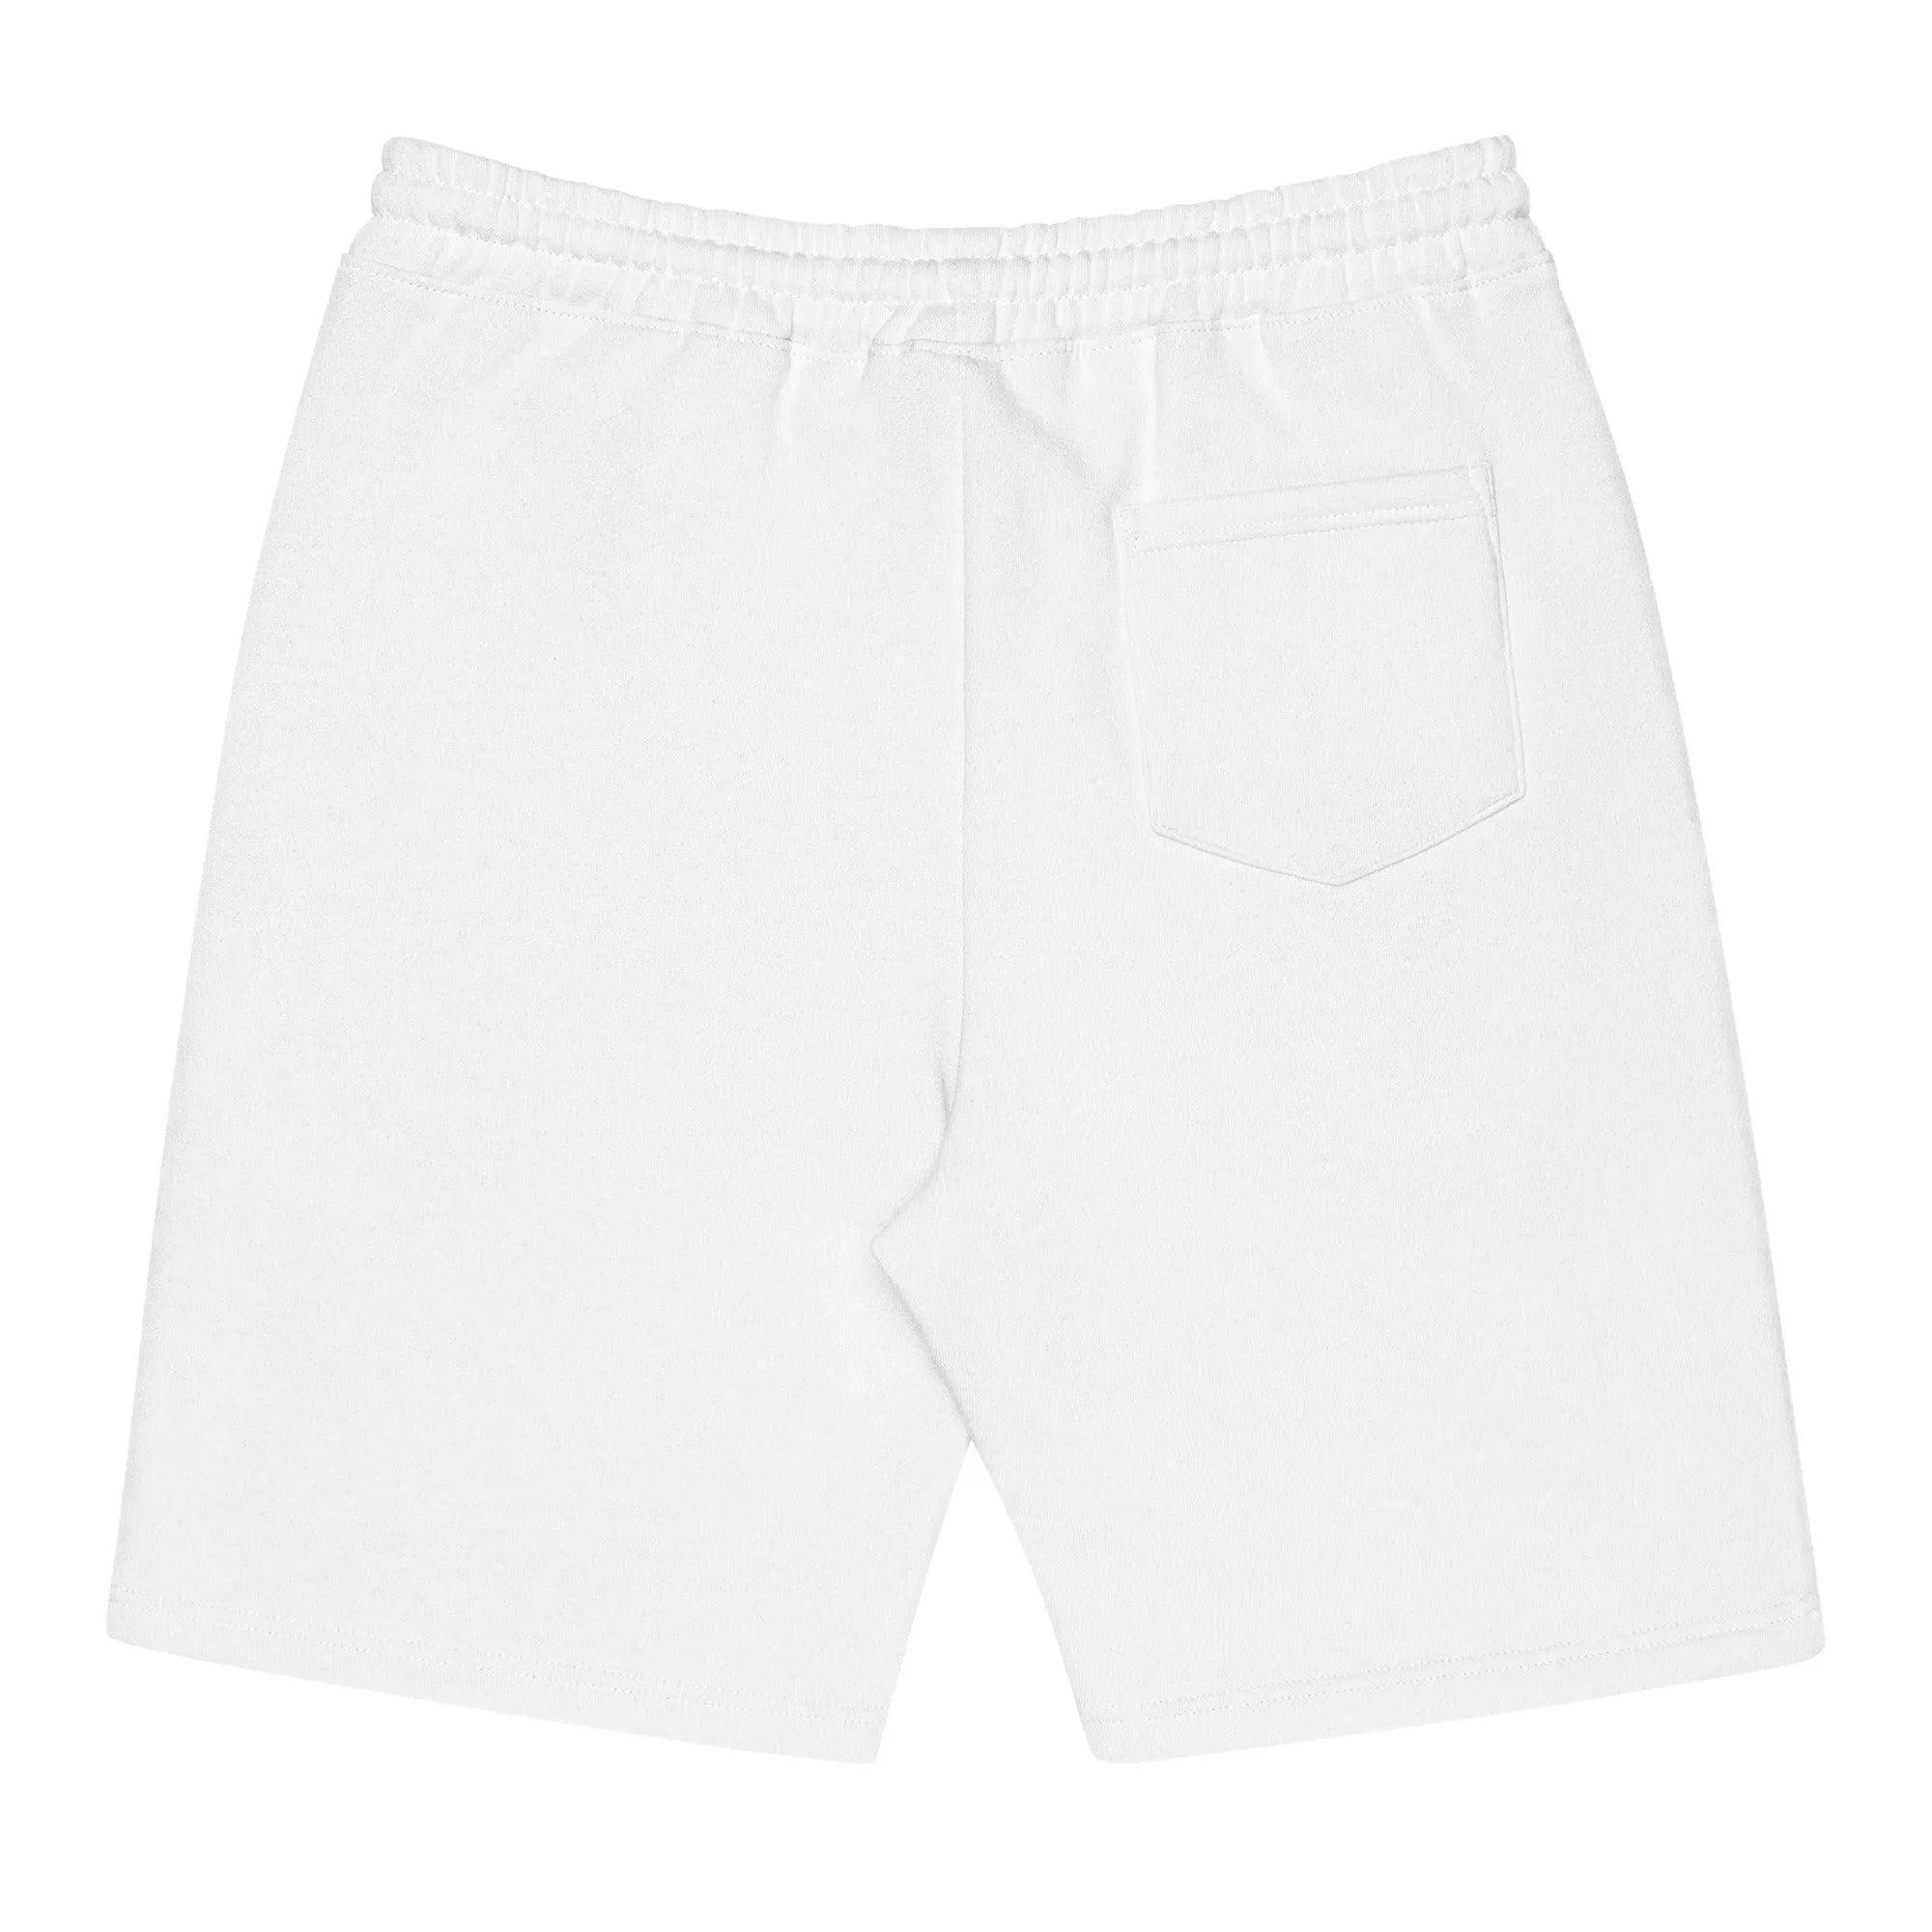 This Is Not Money Fleece Shorts - InvestmenTees